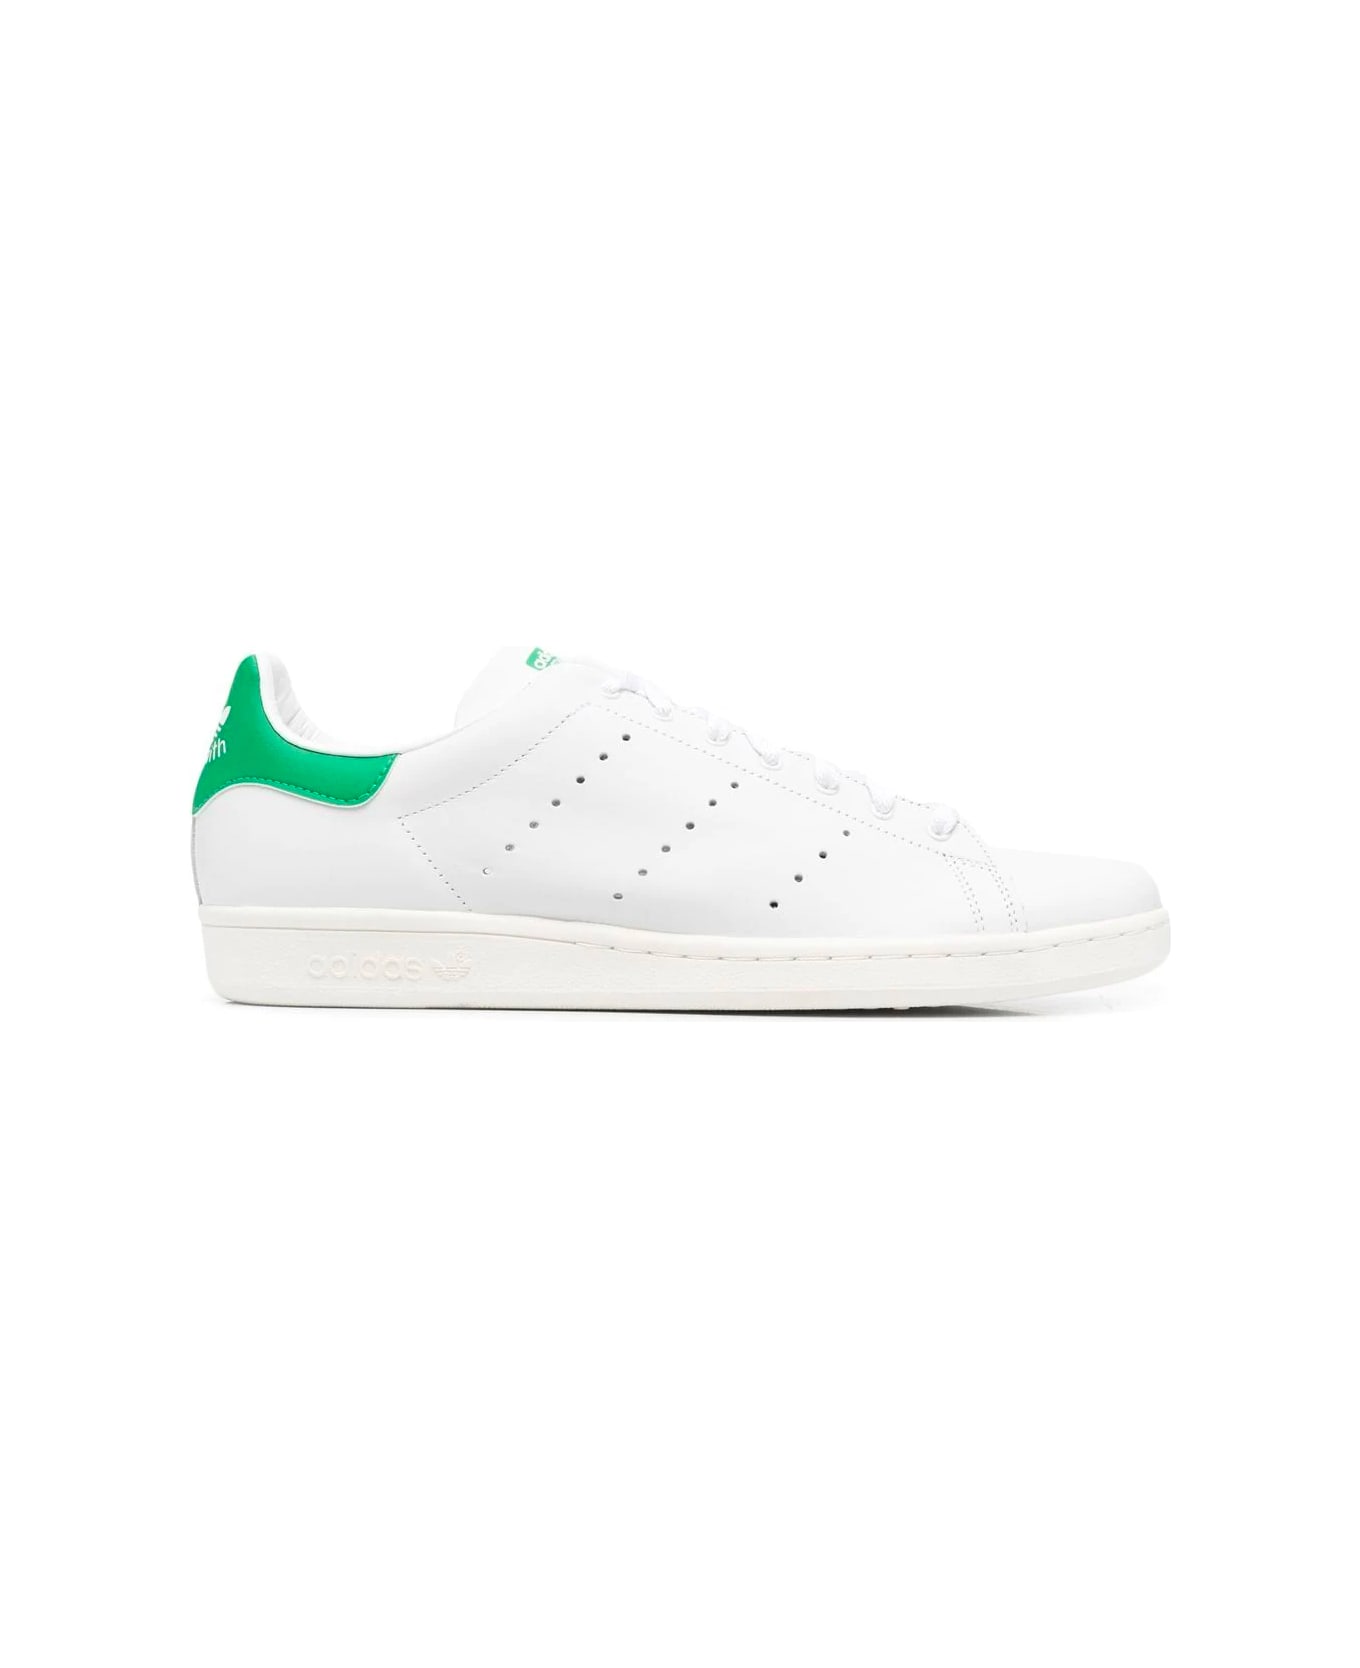 Adidas Stan Smith 80s Sneakers - Ftwwht Ftwwht Green